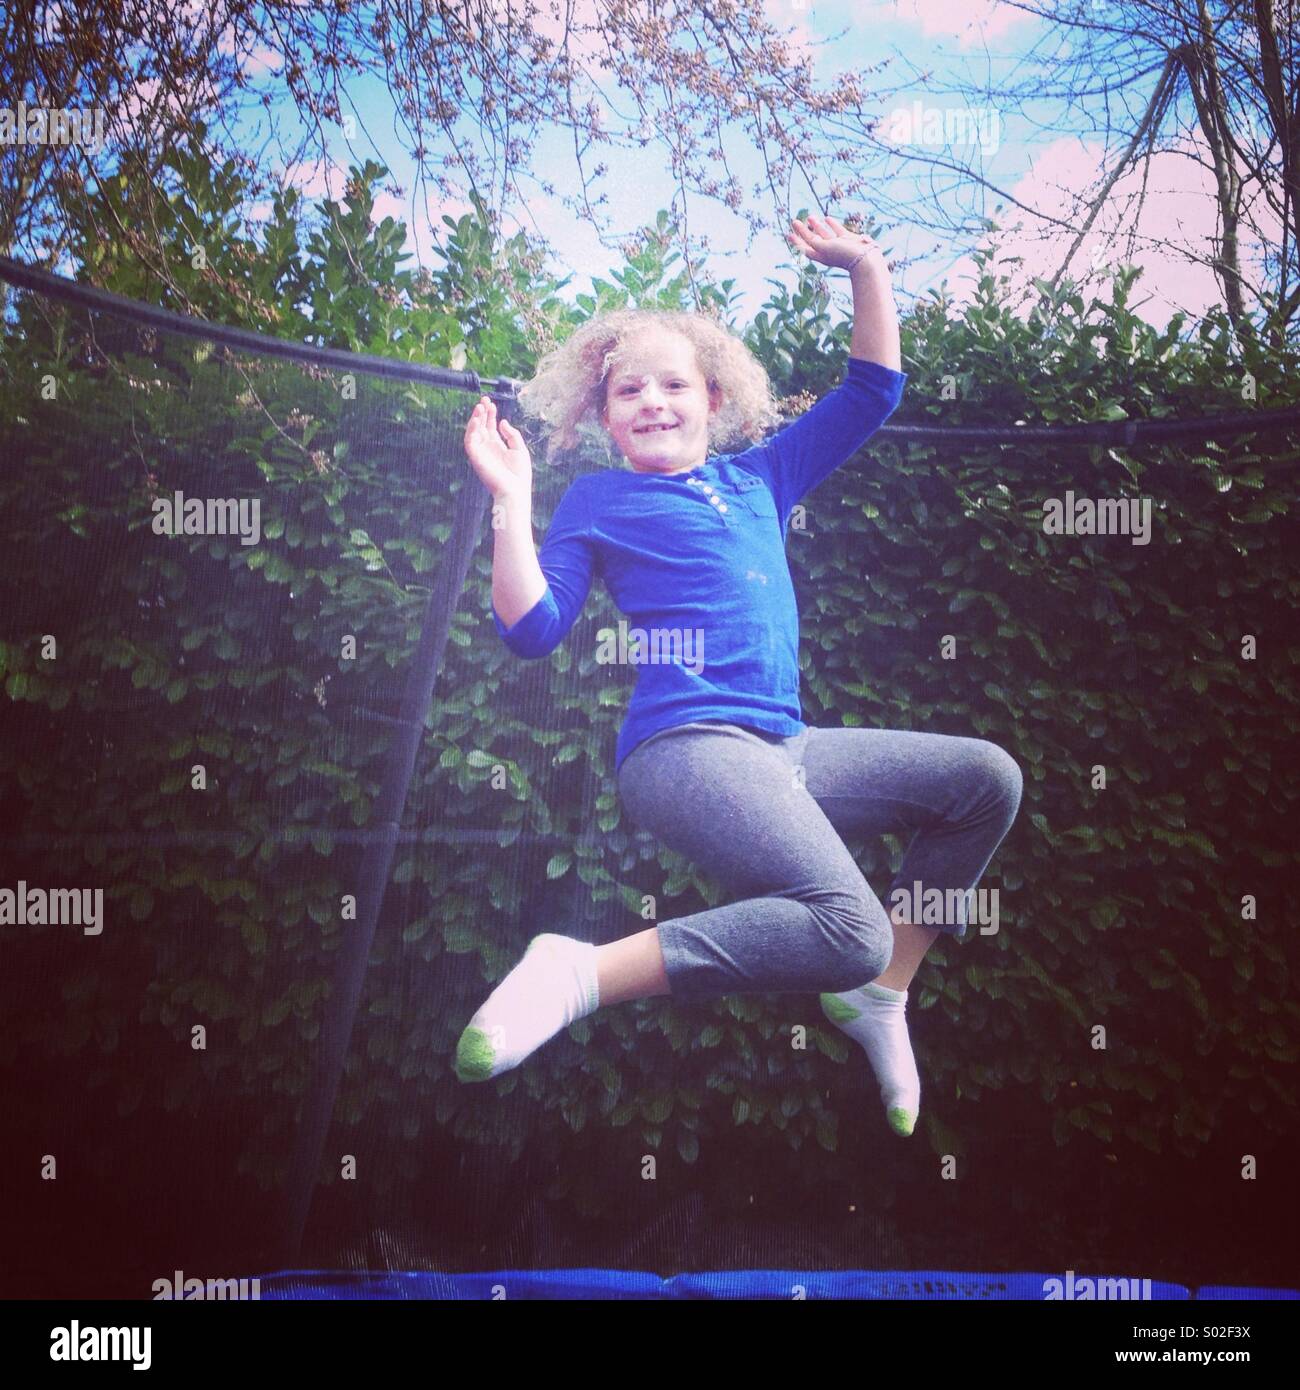 Girl, aged 9, jumping on trampoline. Stock Photo